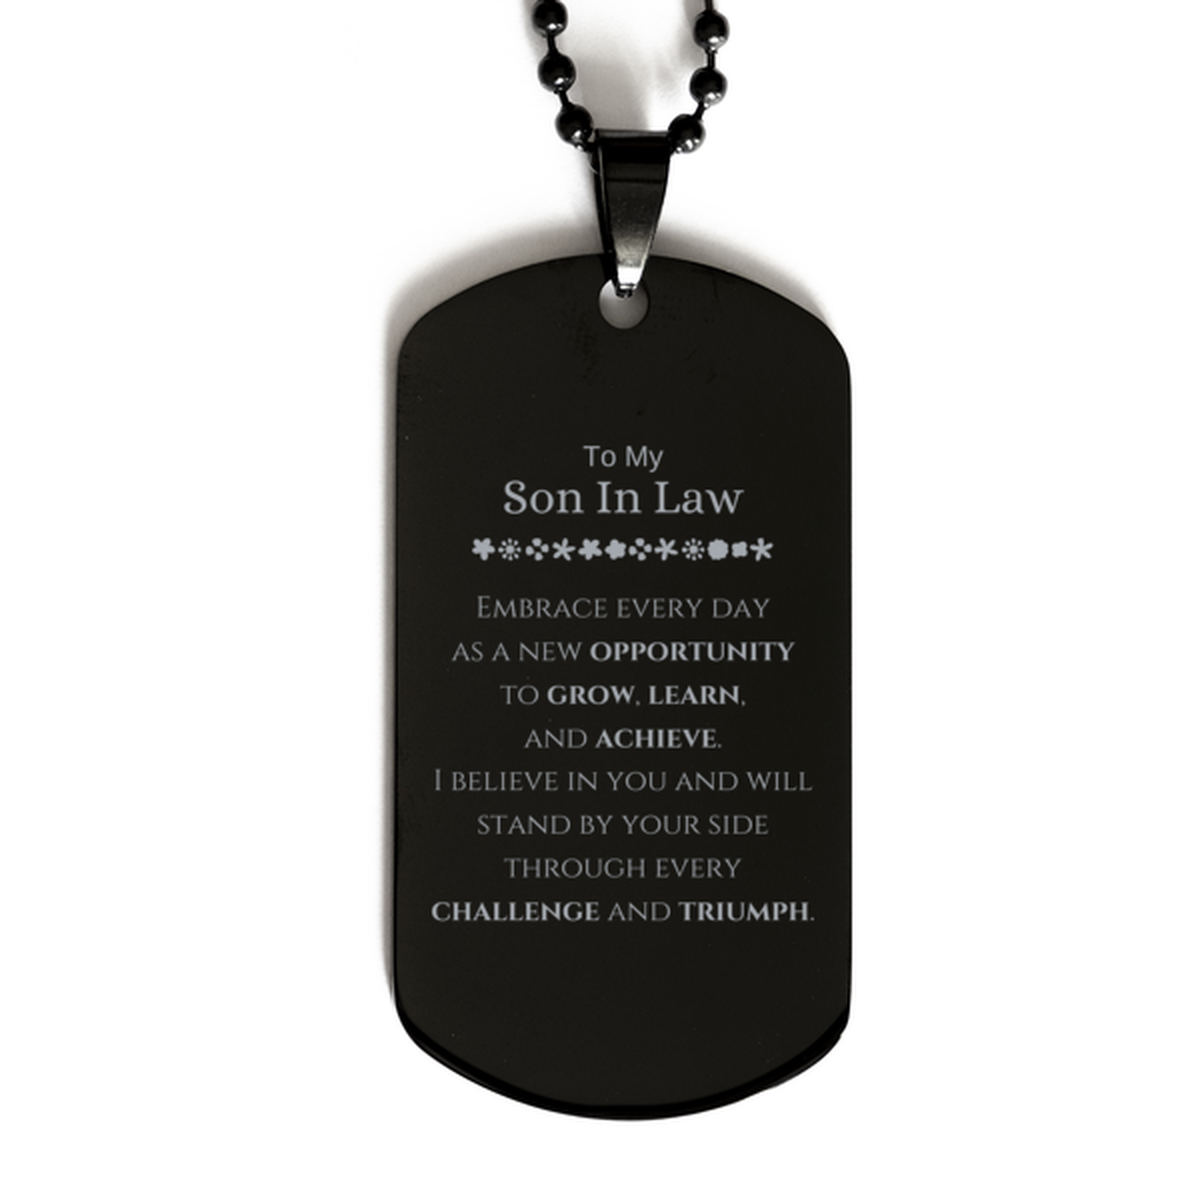 To My Son In Law Gifts, I believe in you and will stand by your side, Inspirational Black Dog Tag For Son In Law, Birthday Christmas Motivational Son In Law Gifts